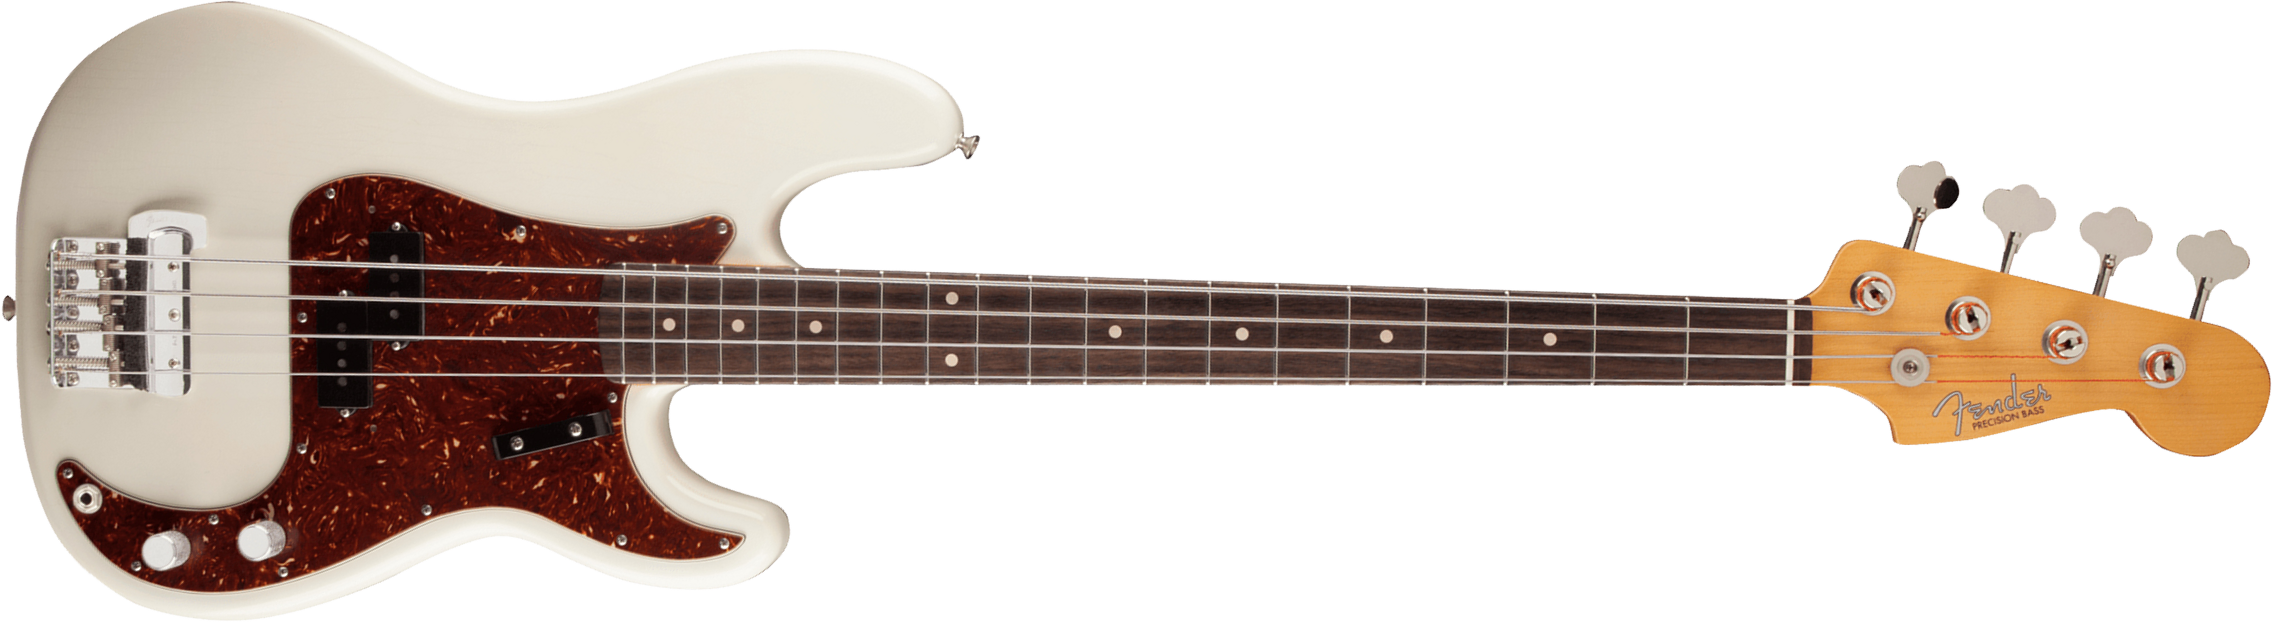 Fender Custom Shop Sean Hurley Precision Bass Signature Rw - Olympic White - Solid body electric bass - Main picture